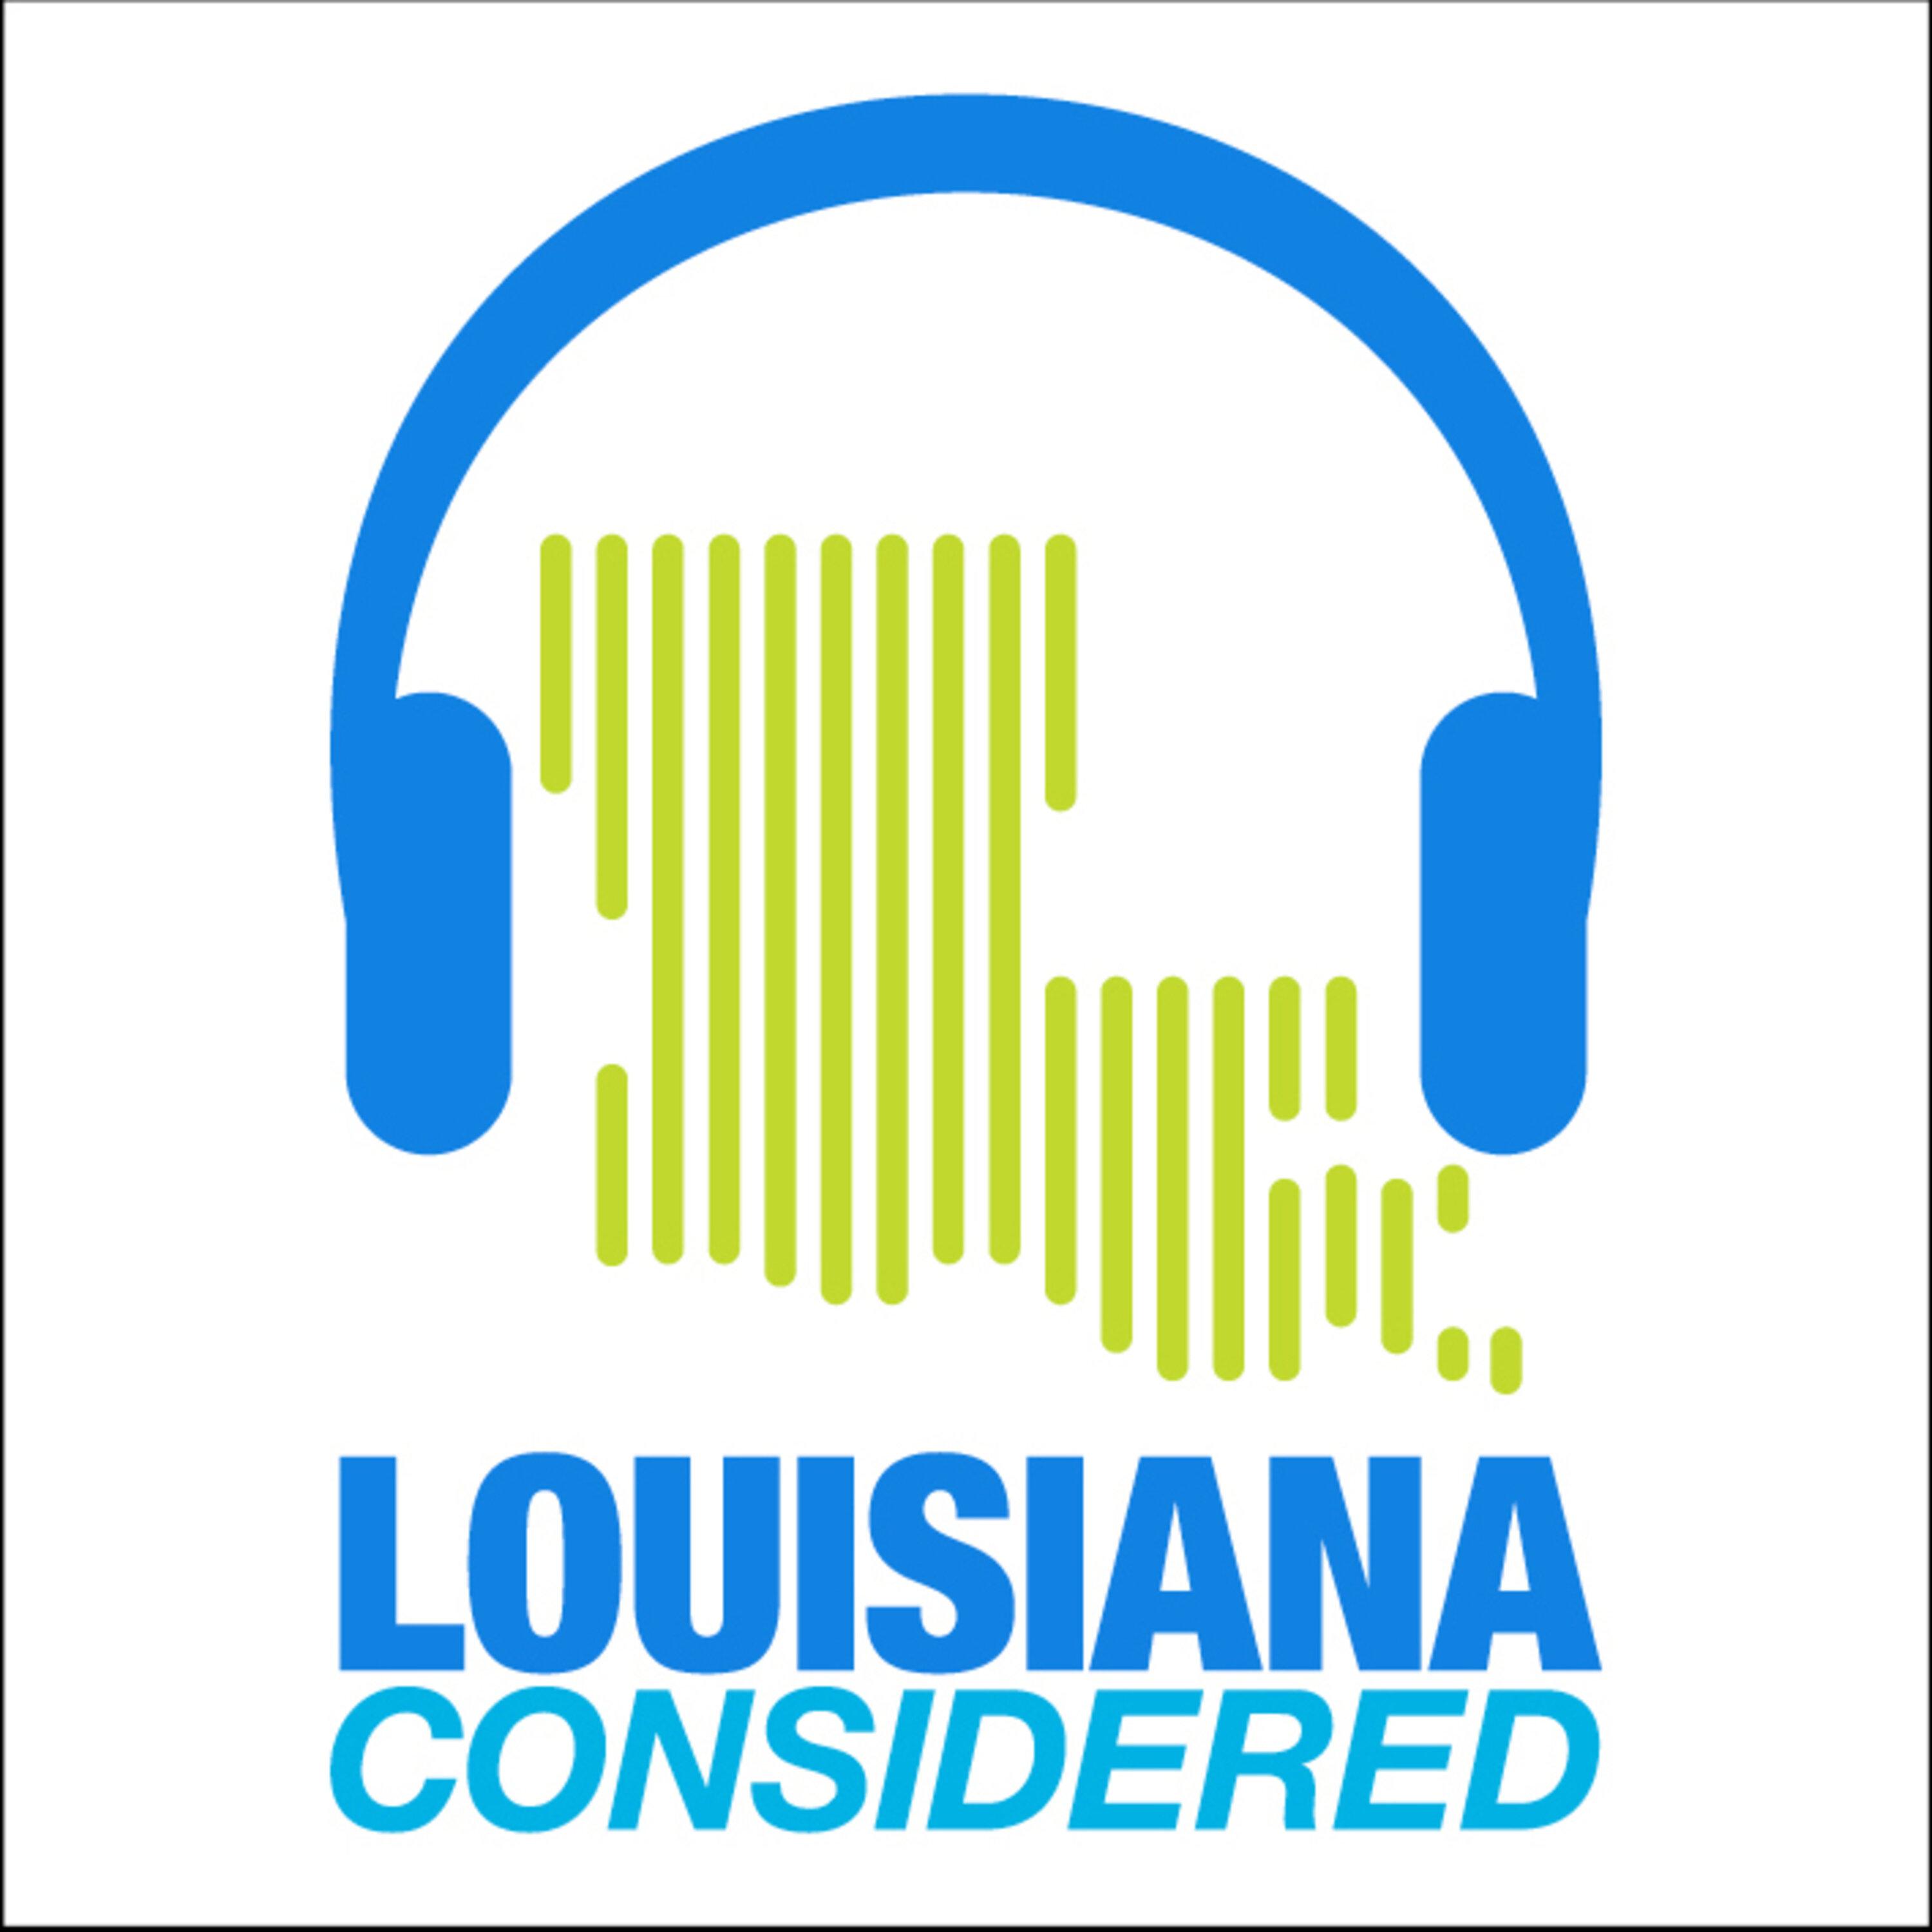 Thumbnail for "Louisiana Considered: Special education programs and more in New Orleans schools".